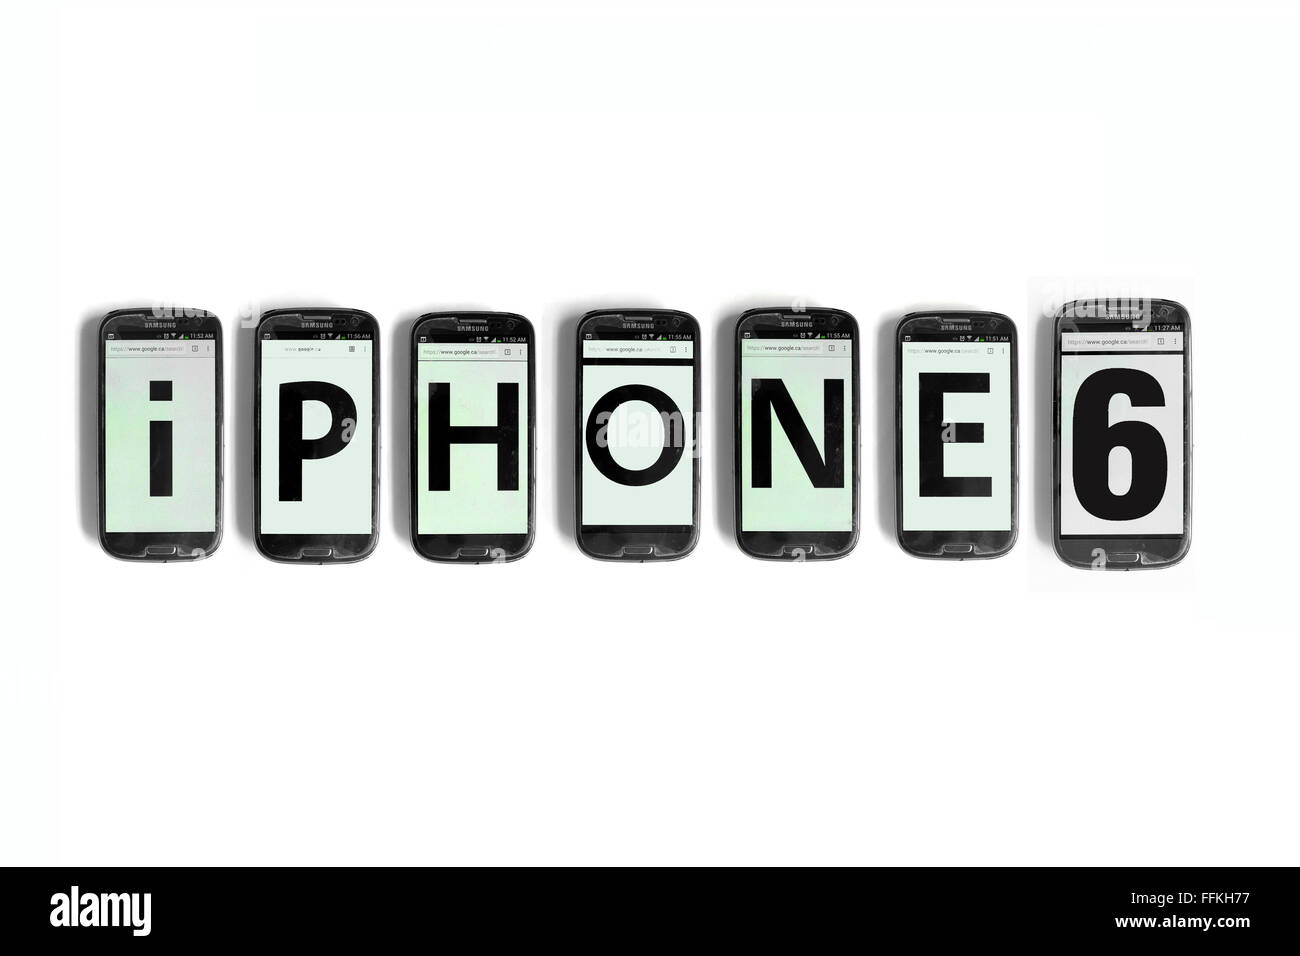 iPhone6 written on smartphone screens photographed against a white background. Stock Photo